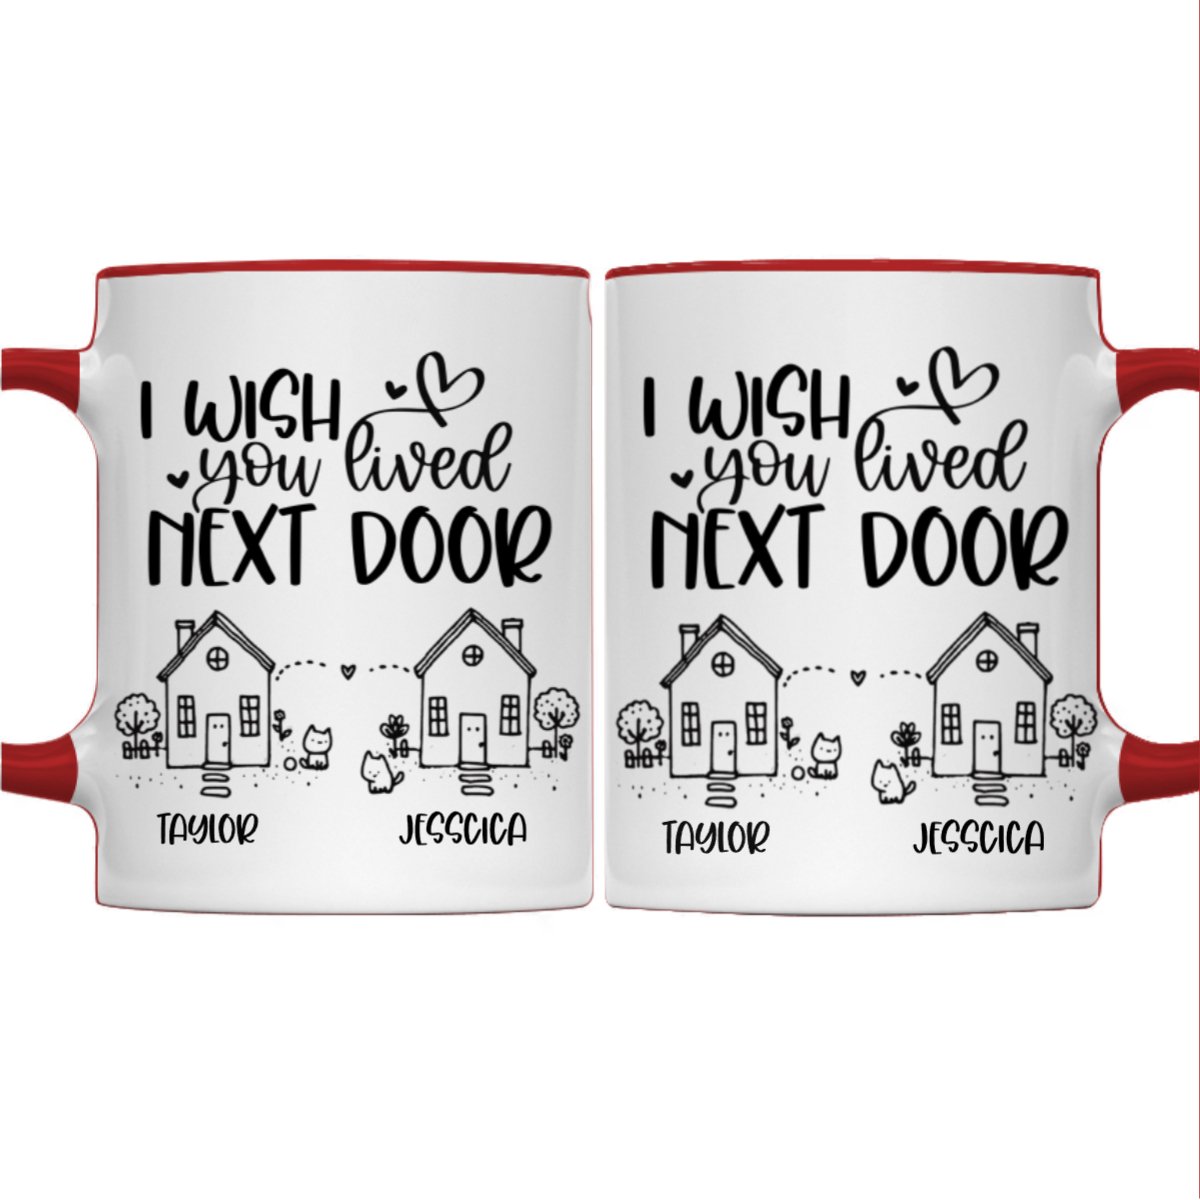 Besties - I Wish We Lived Closer True Friends Are Great Riches - Personalized Accent Mug - The Next Custom Gift